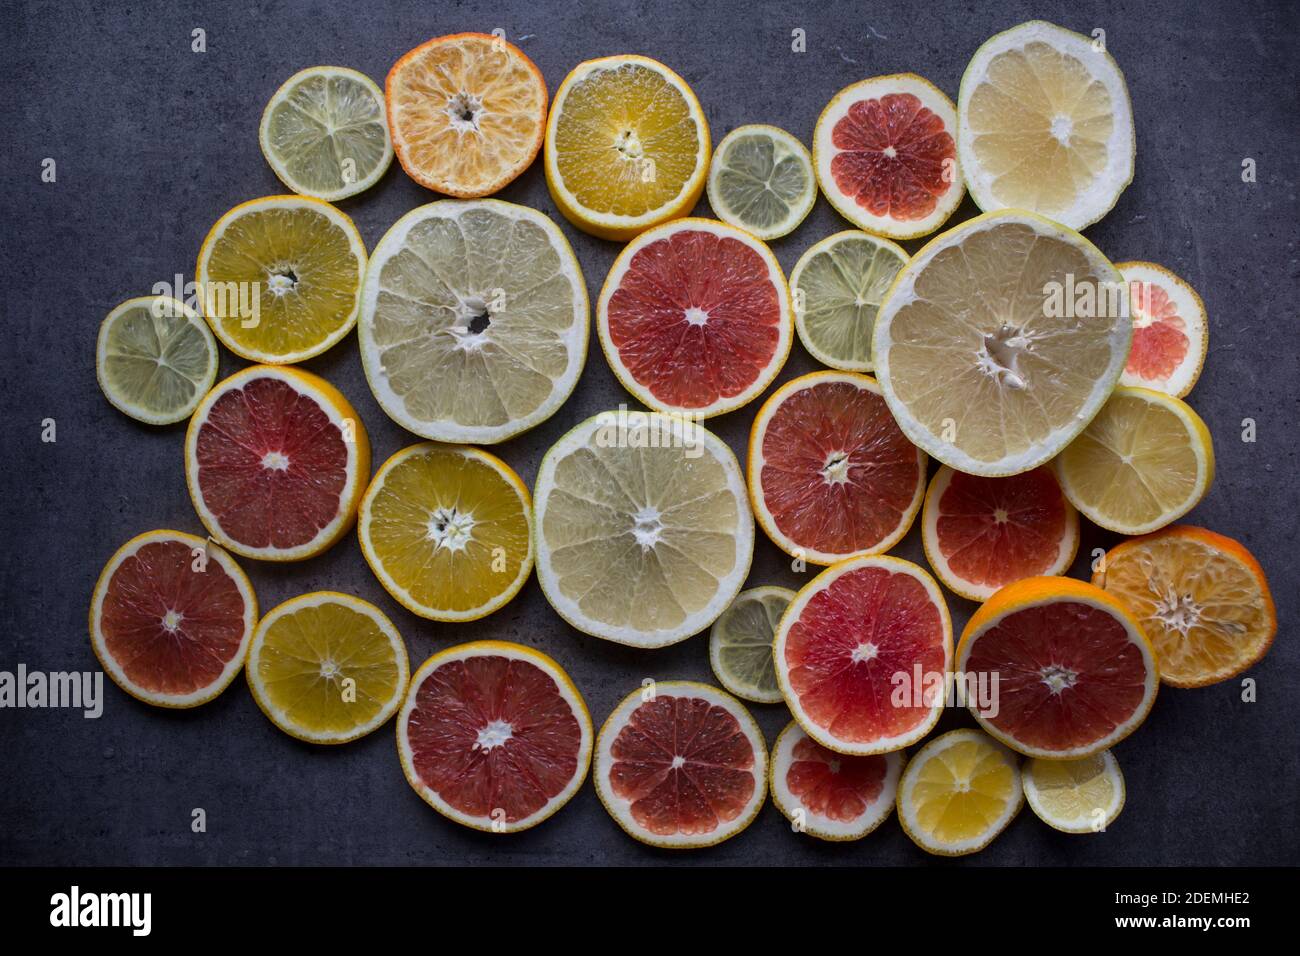 Red orange slices on a table. Fruit texture close up photo. Dark gray background with copy space. Stock Photo